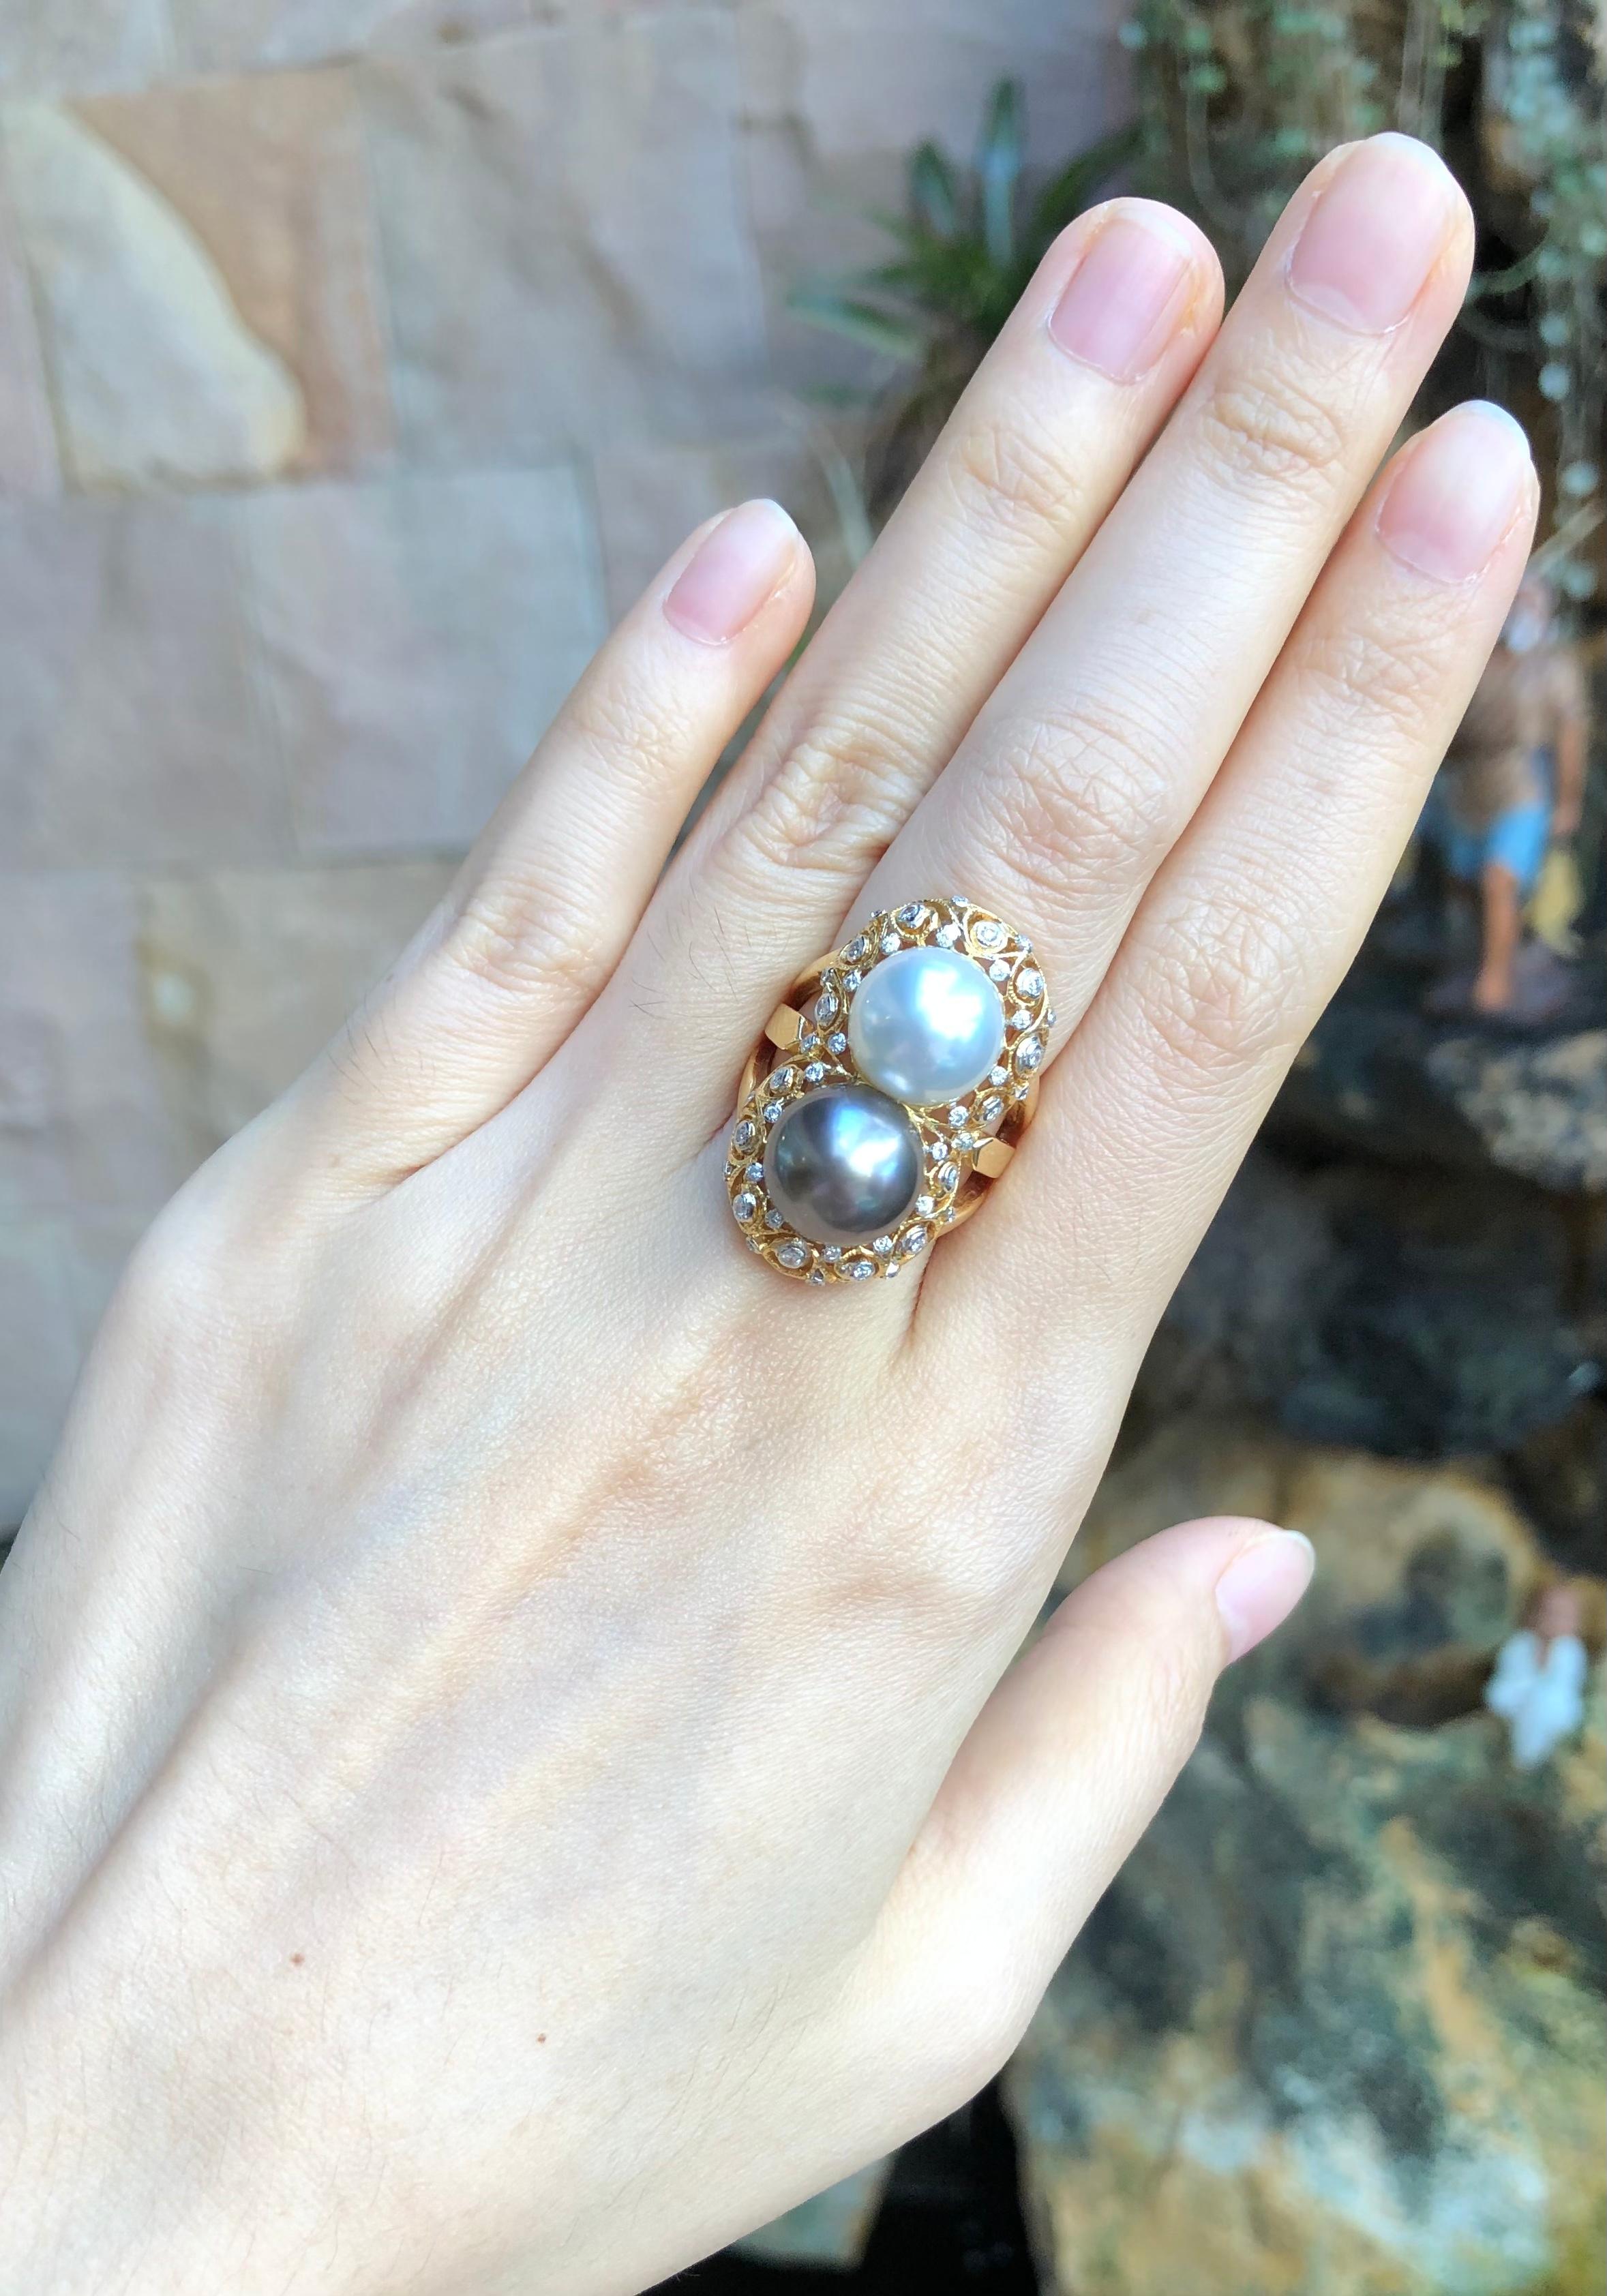 South Sea Pearl with Diamond 0.25 carat Ring set in 18 Karat Gold Settings

Width:  1.8 cm 
Length: 2.9 cm
Ring Size: 51
Total Weight: 16.09 grams

